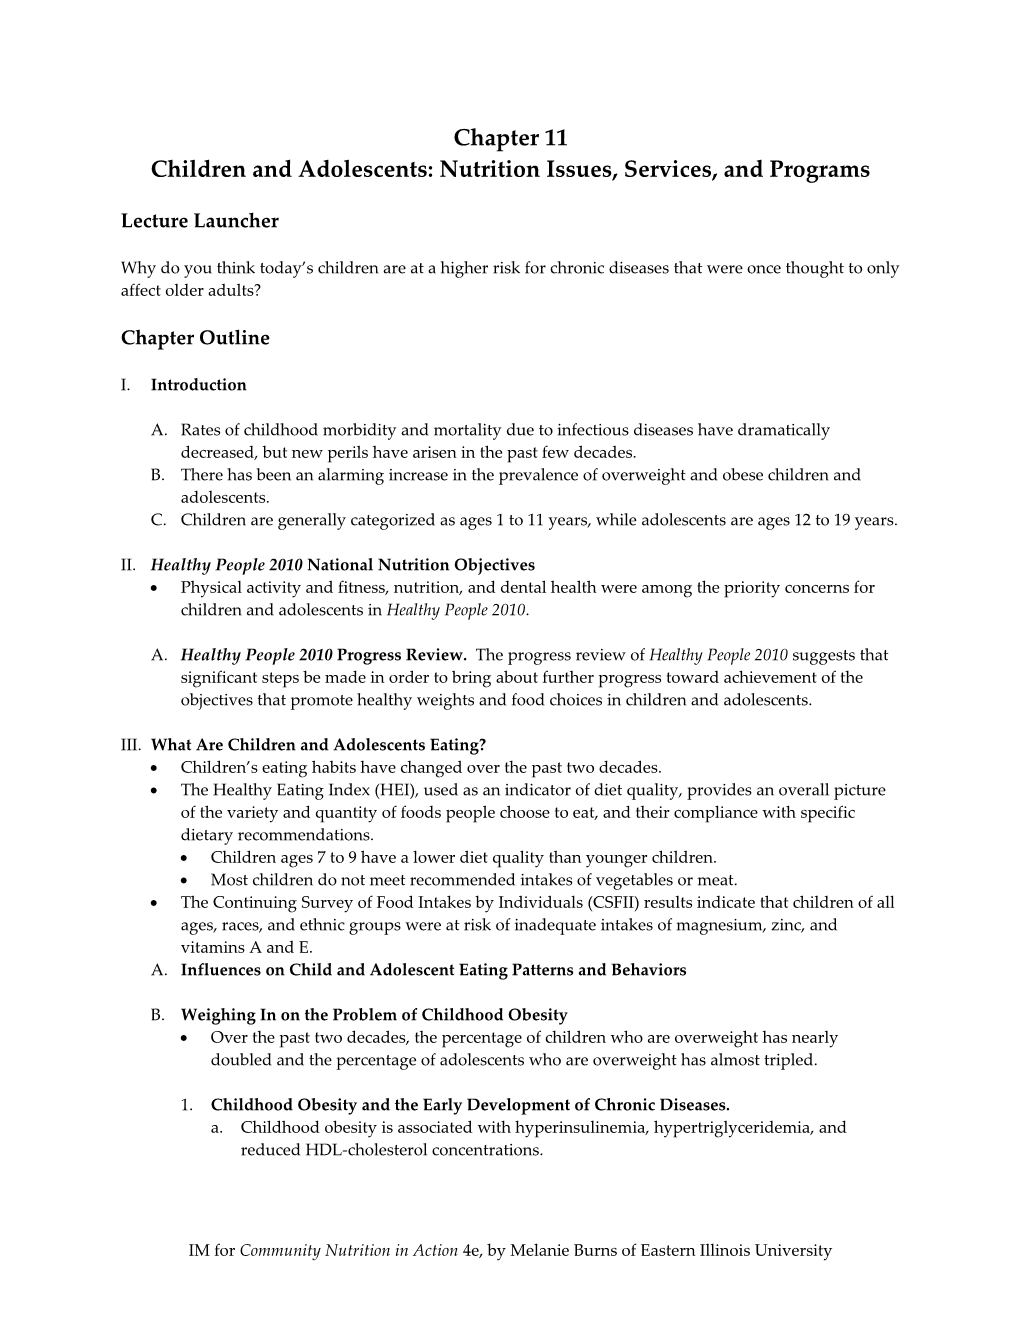 Children and Adolescents: Nutrition Issues, Services, and Programs